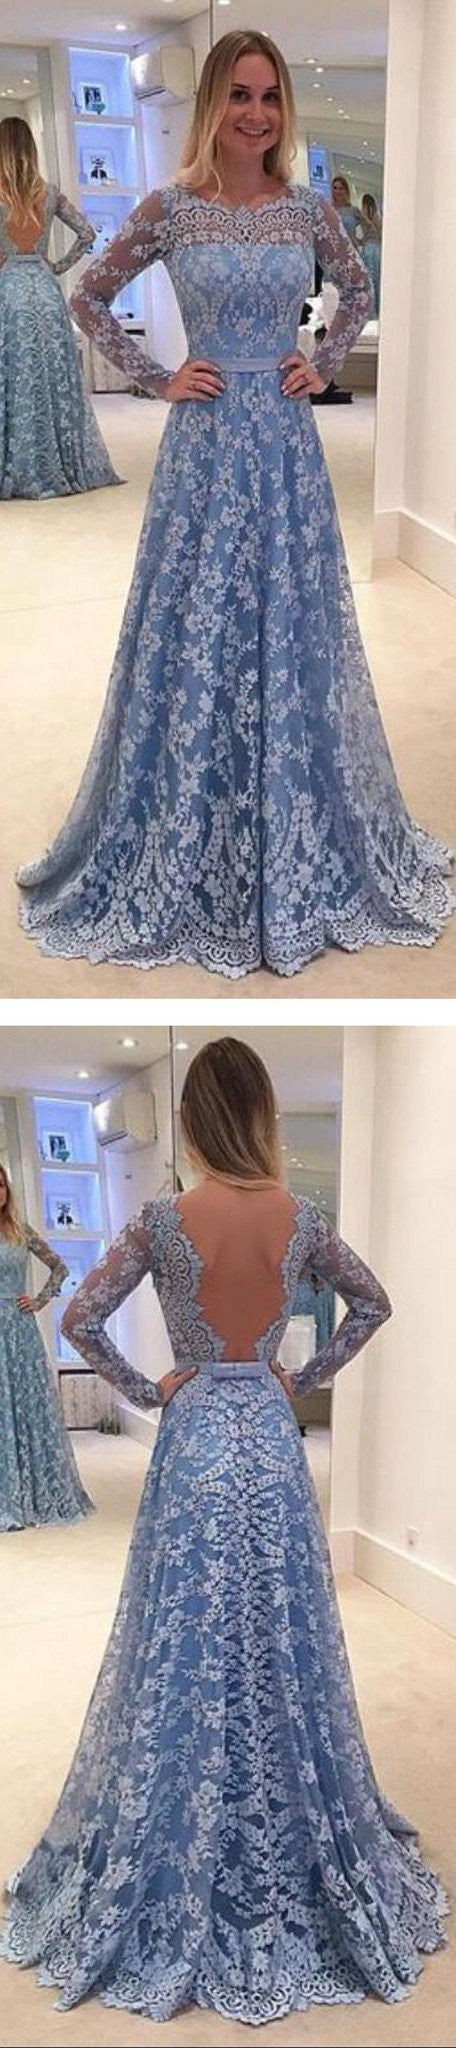 Blue Prom Dress,Lace Prom Dress,Long Sleeve Prom Dress,Backless Prom Dress,MA039-Dolly Gown